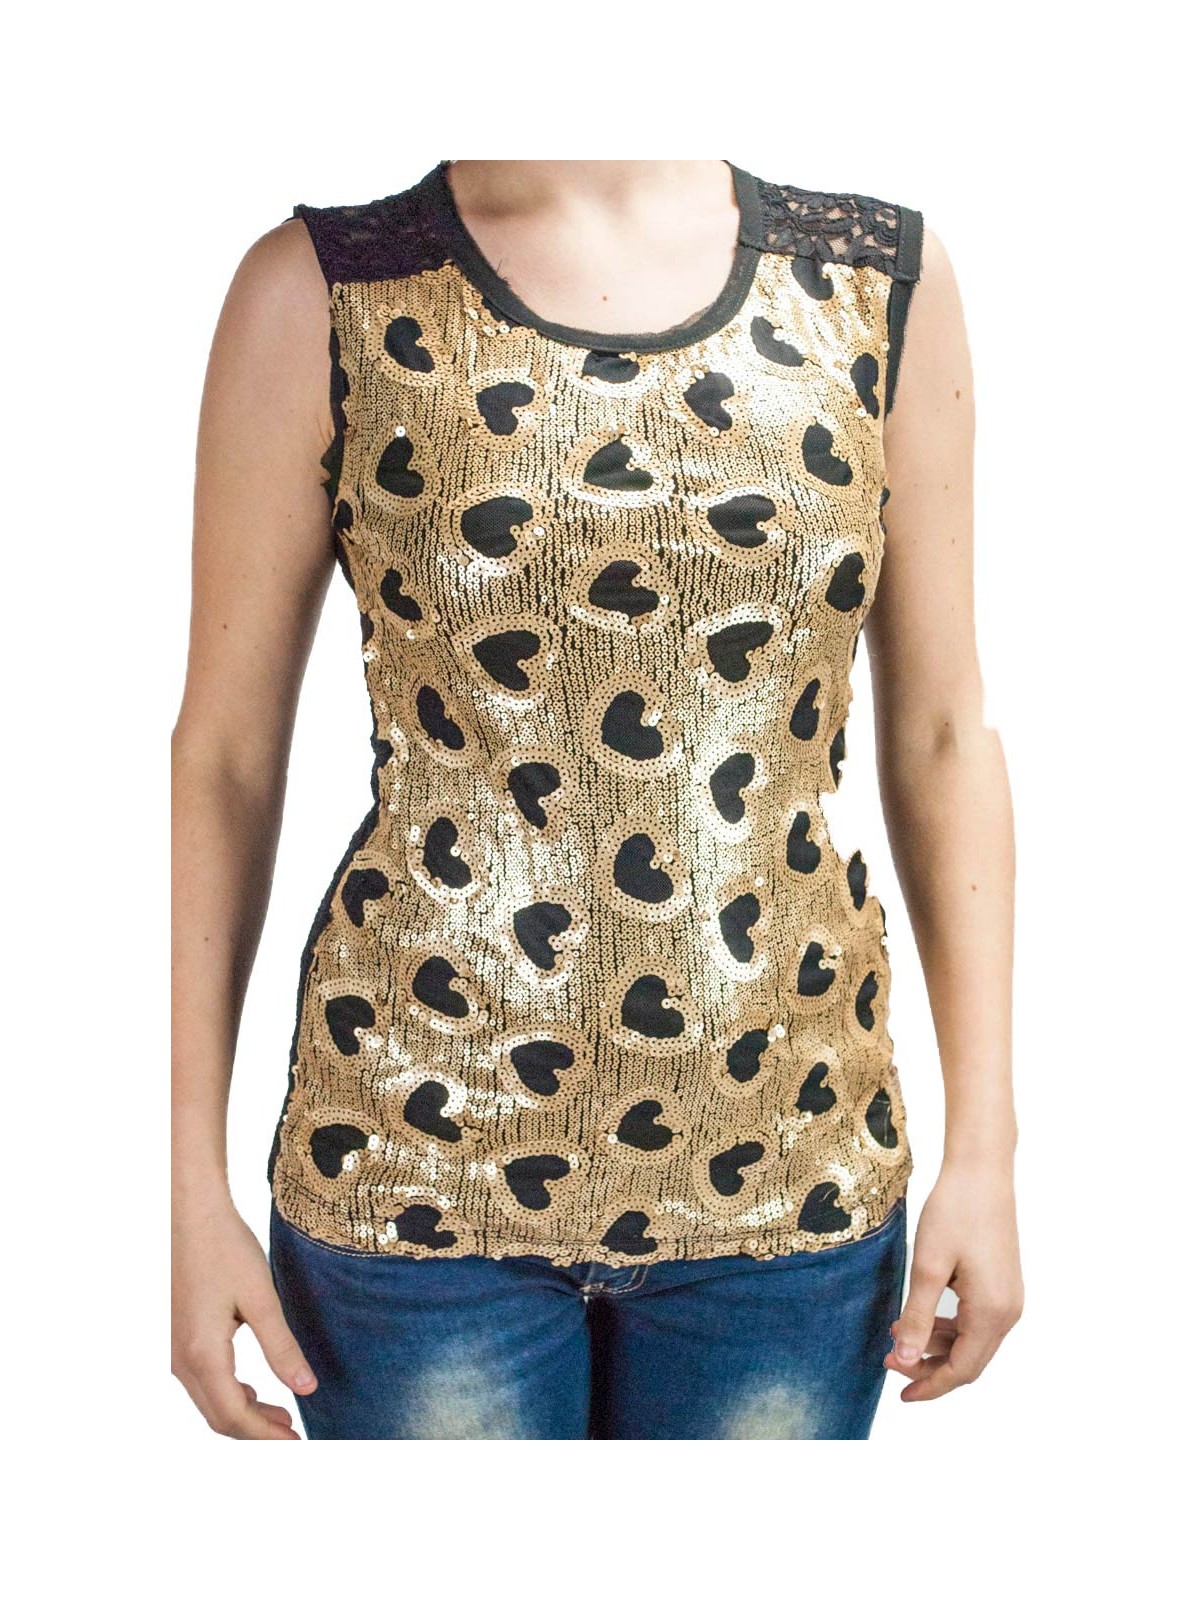 Camisole Sequins Hearts - Back lace black